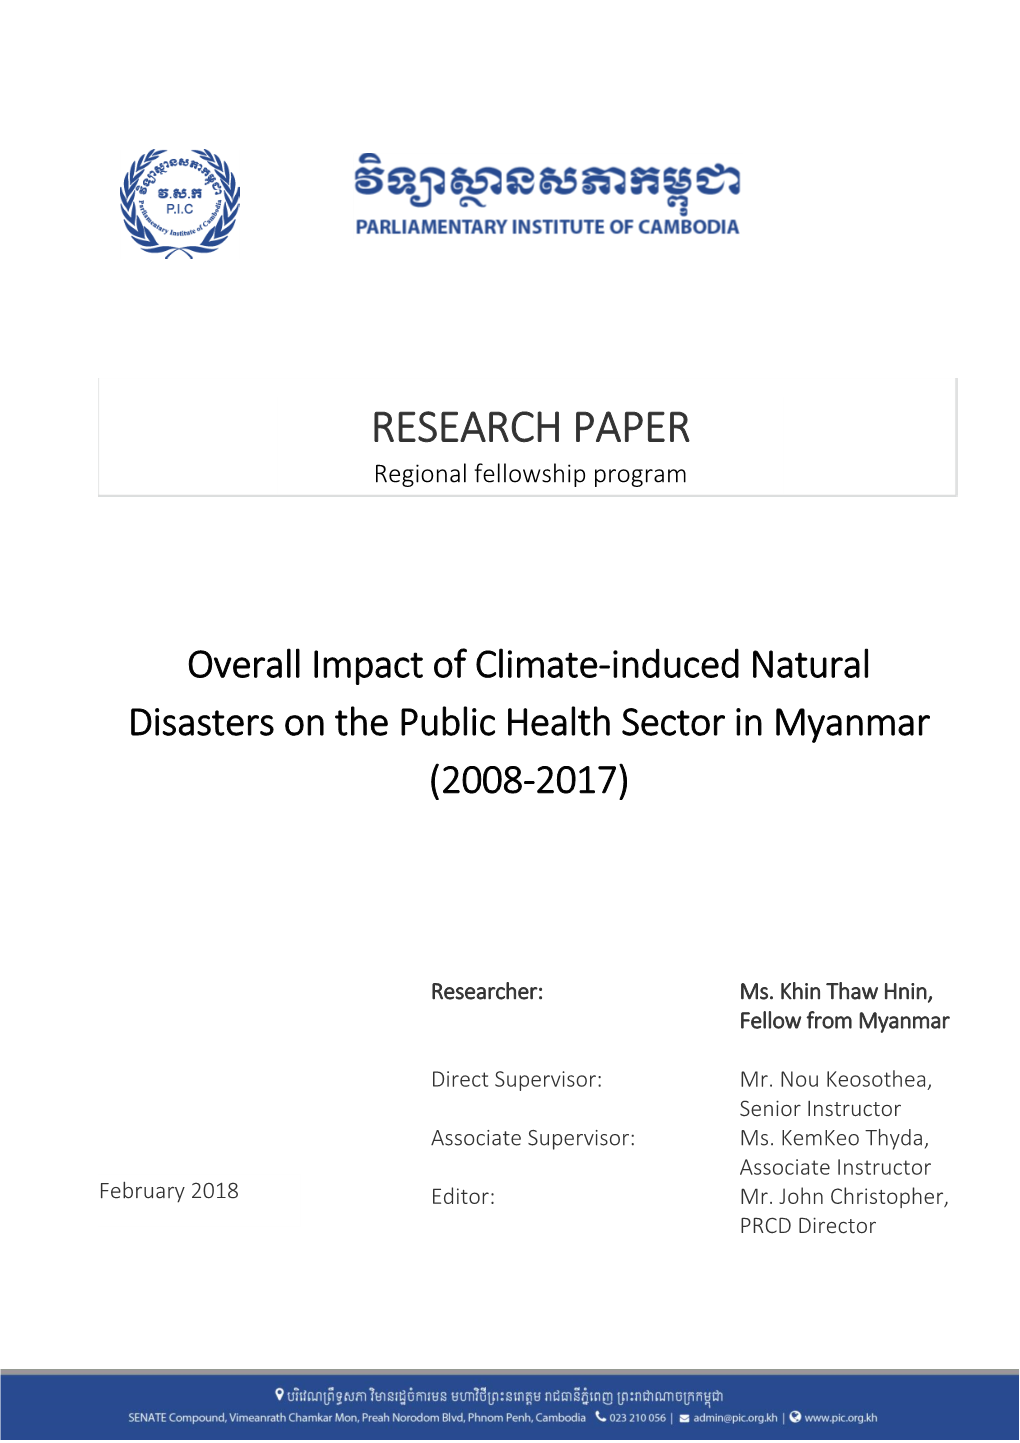 Overall Impact of Climate-Induced Natural Disasters on the Public Health Sector in Myanmar (2008-2017)